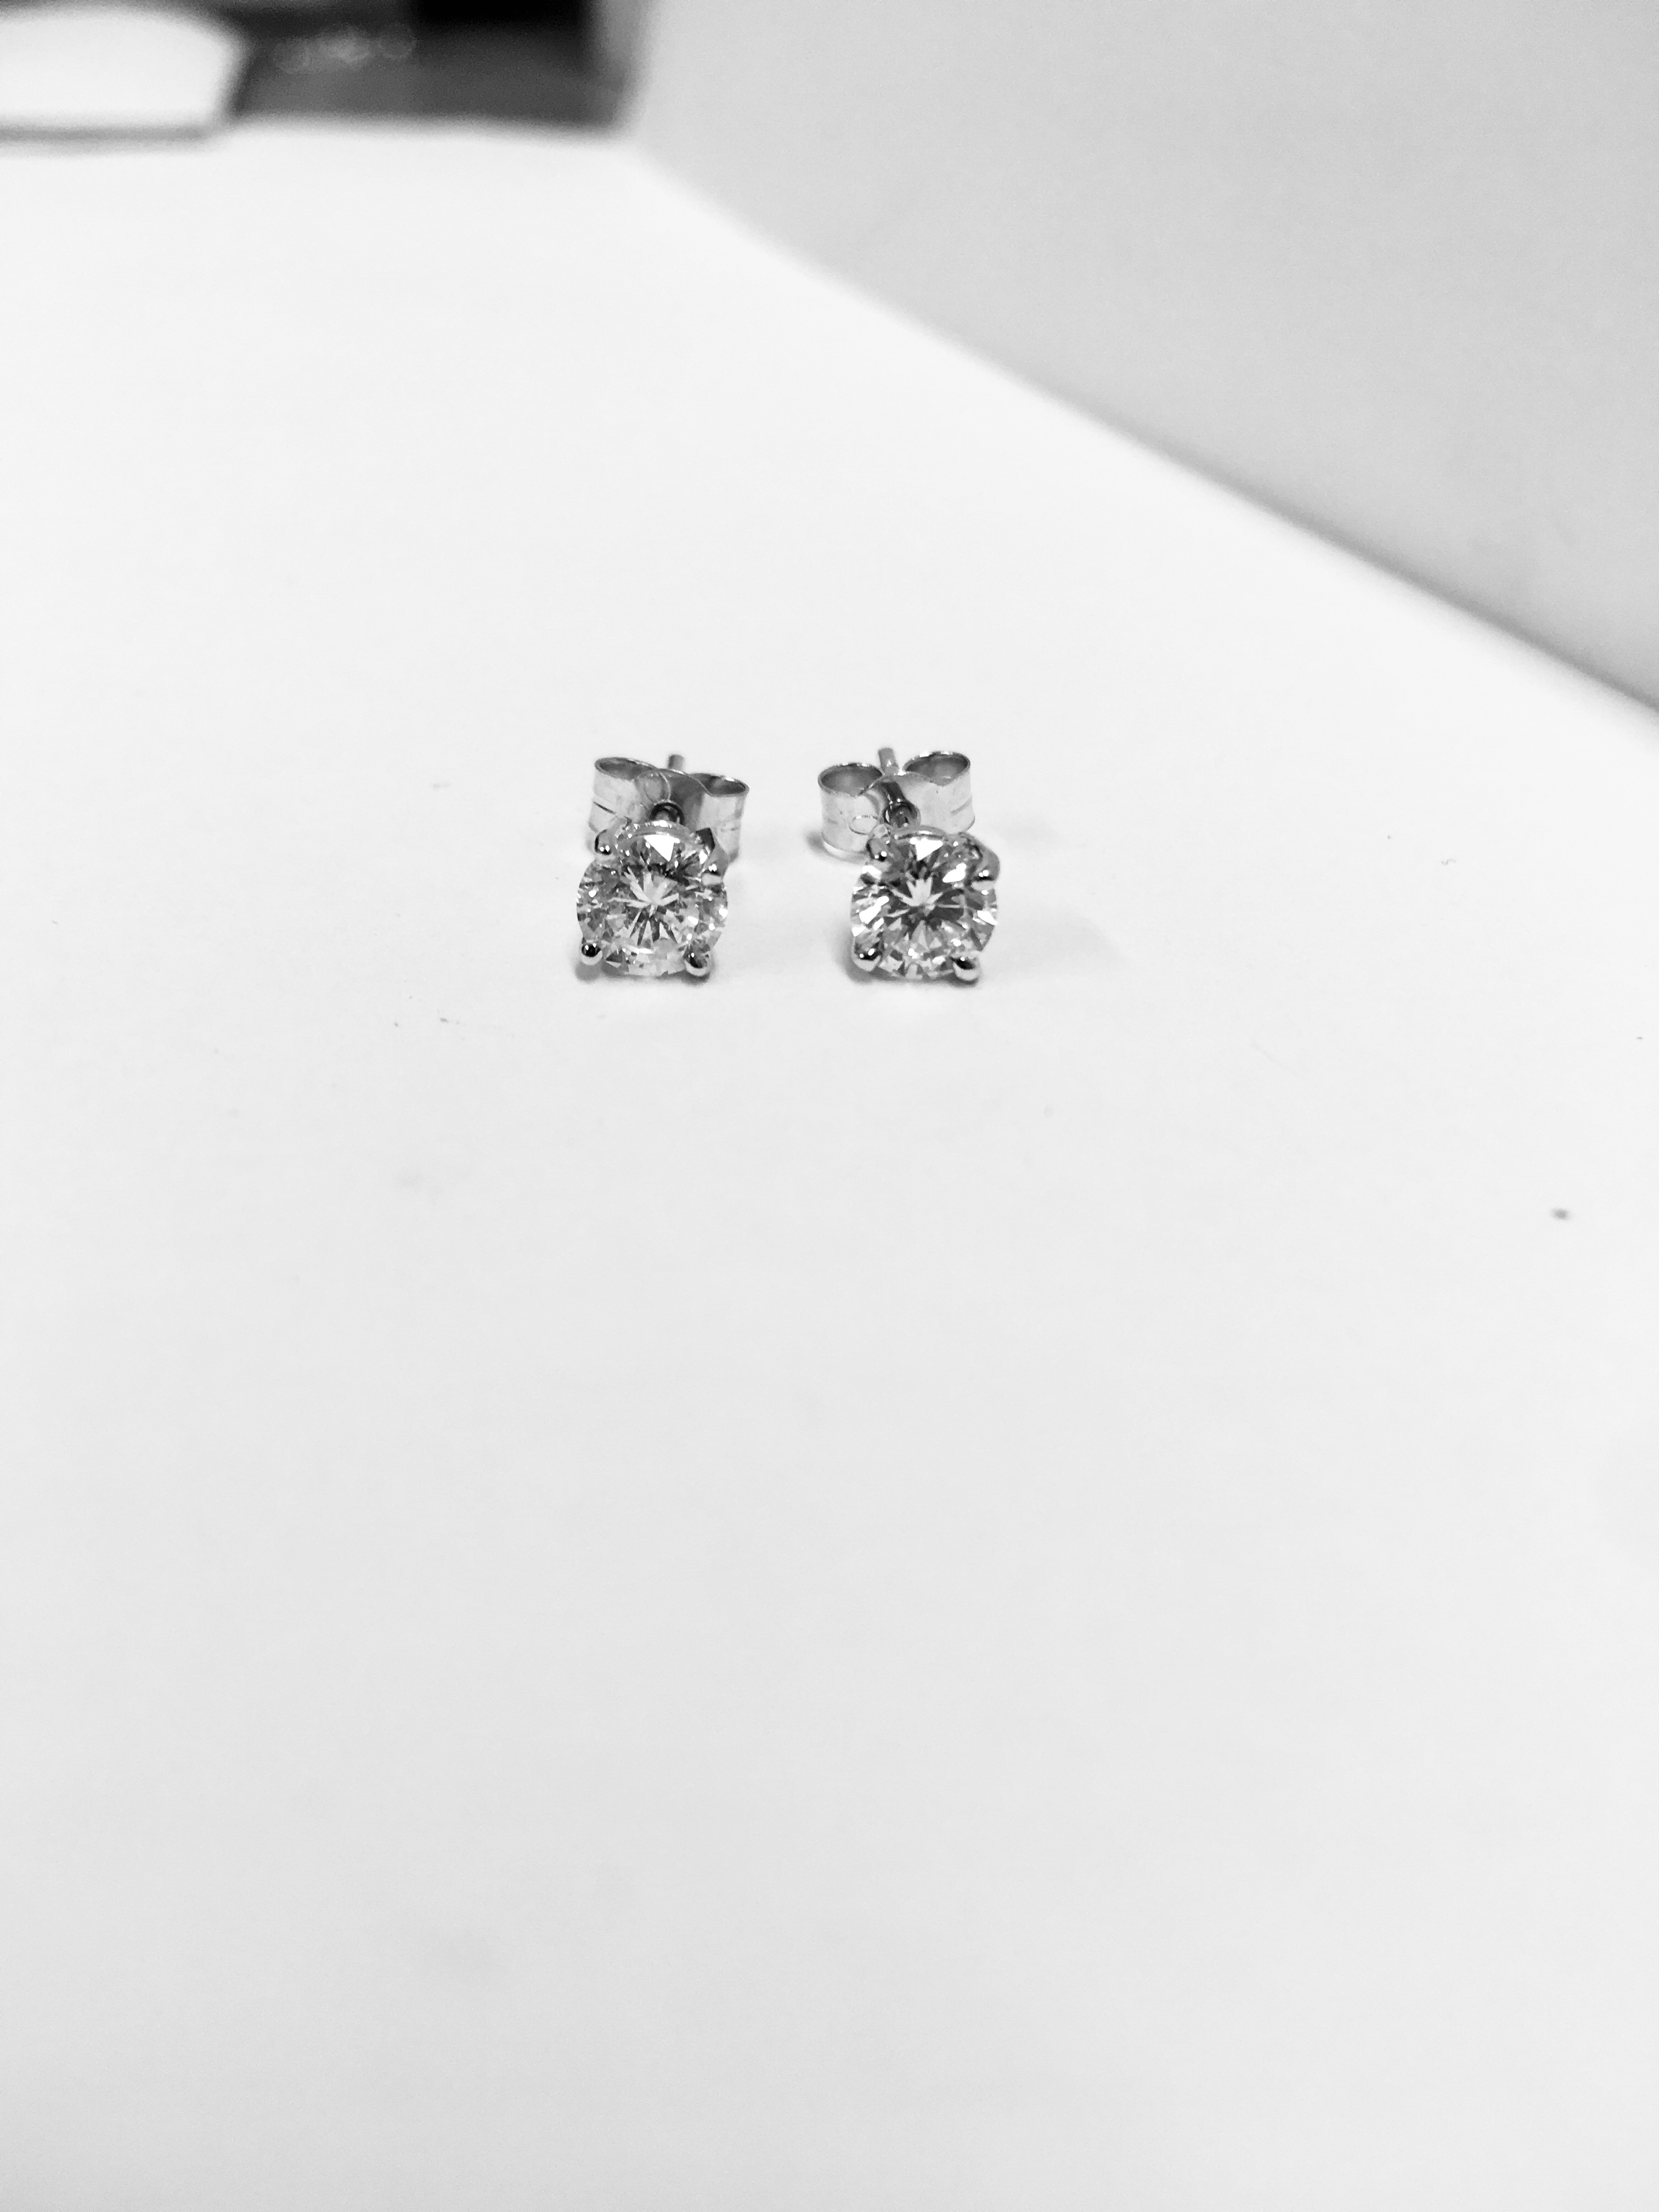 2.00ct Diamond solitaire earrings set with brilliant cut diamonds - Image 27 of 28